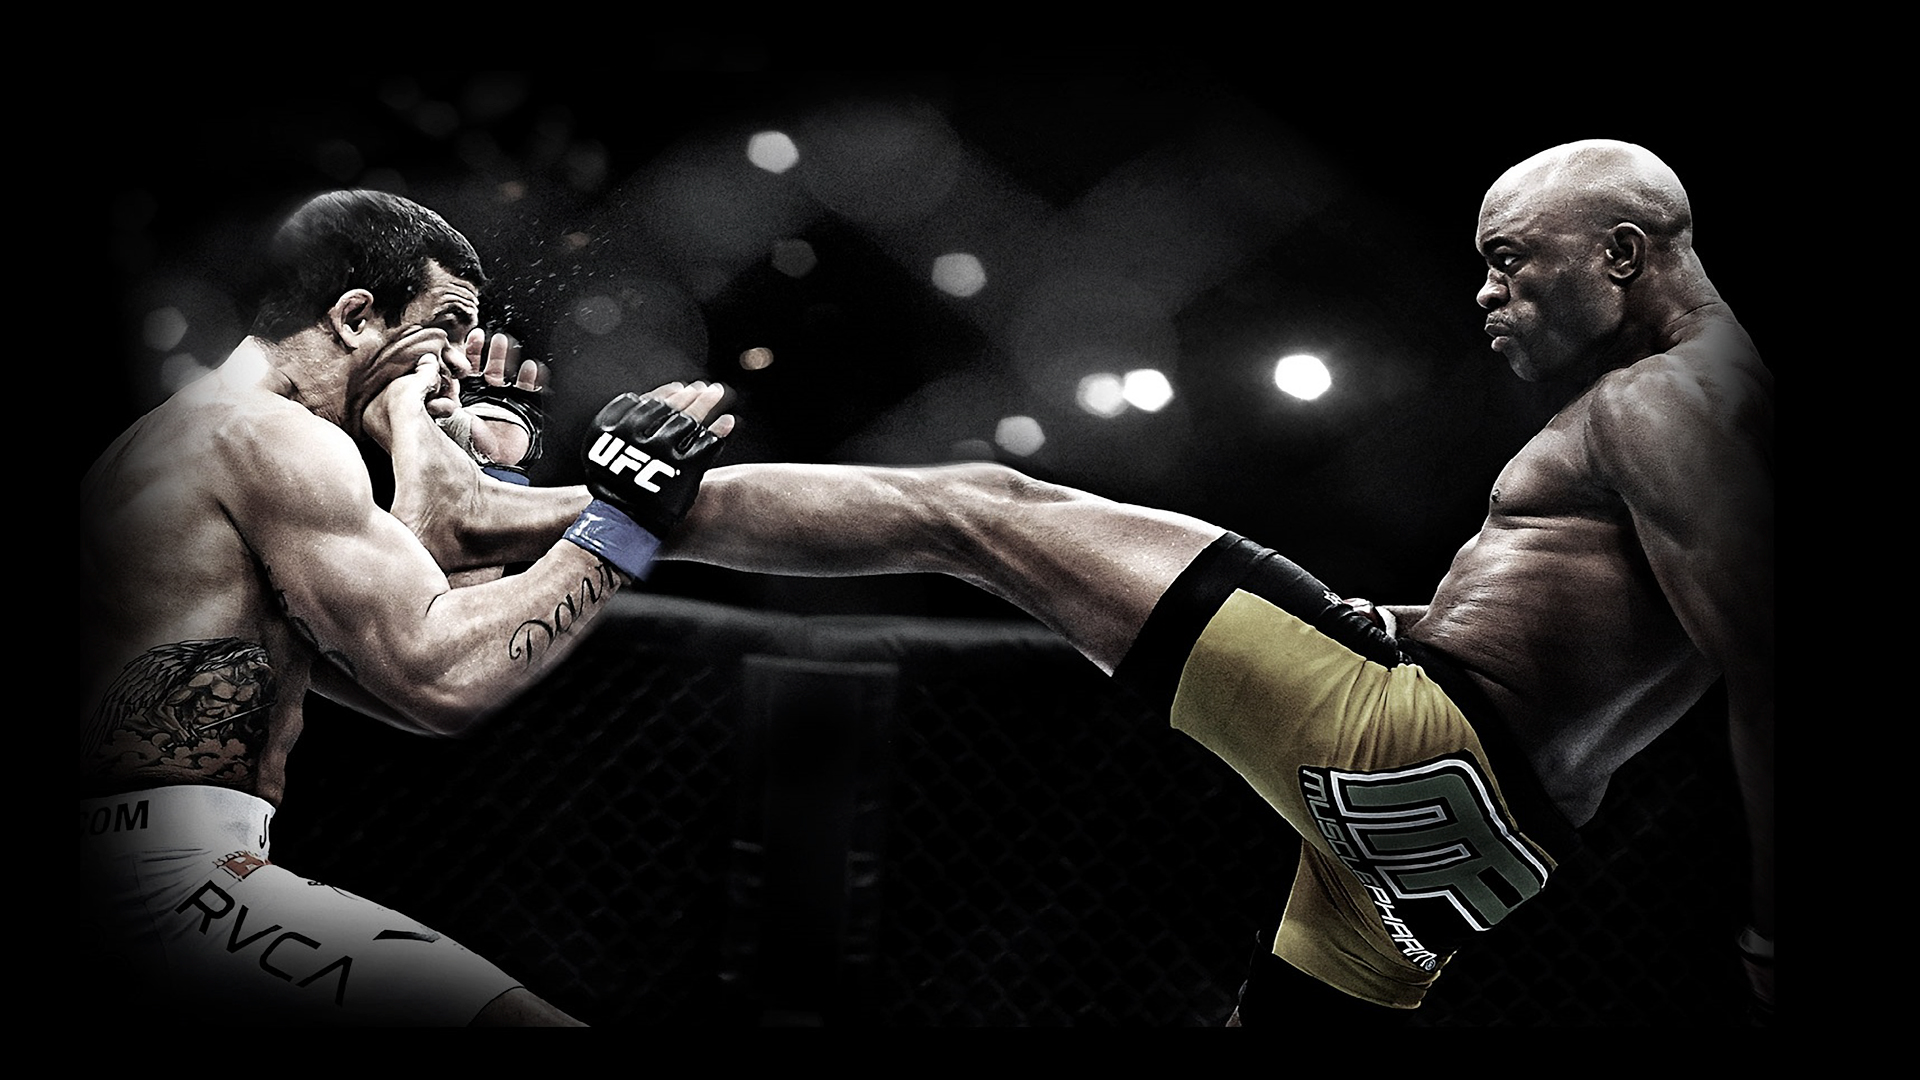 17+] UFC Sport Wallpapers on